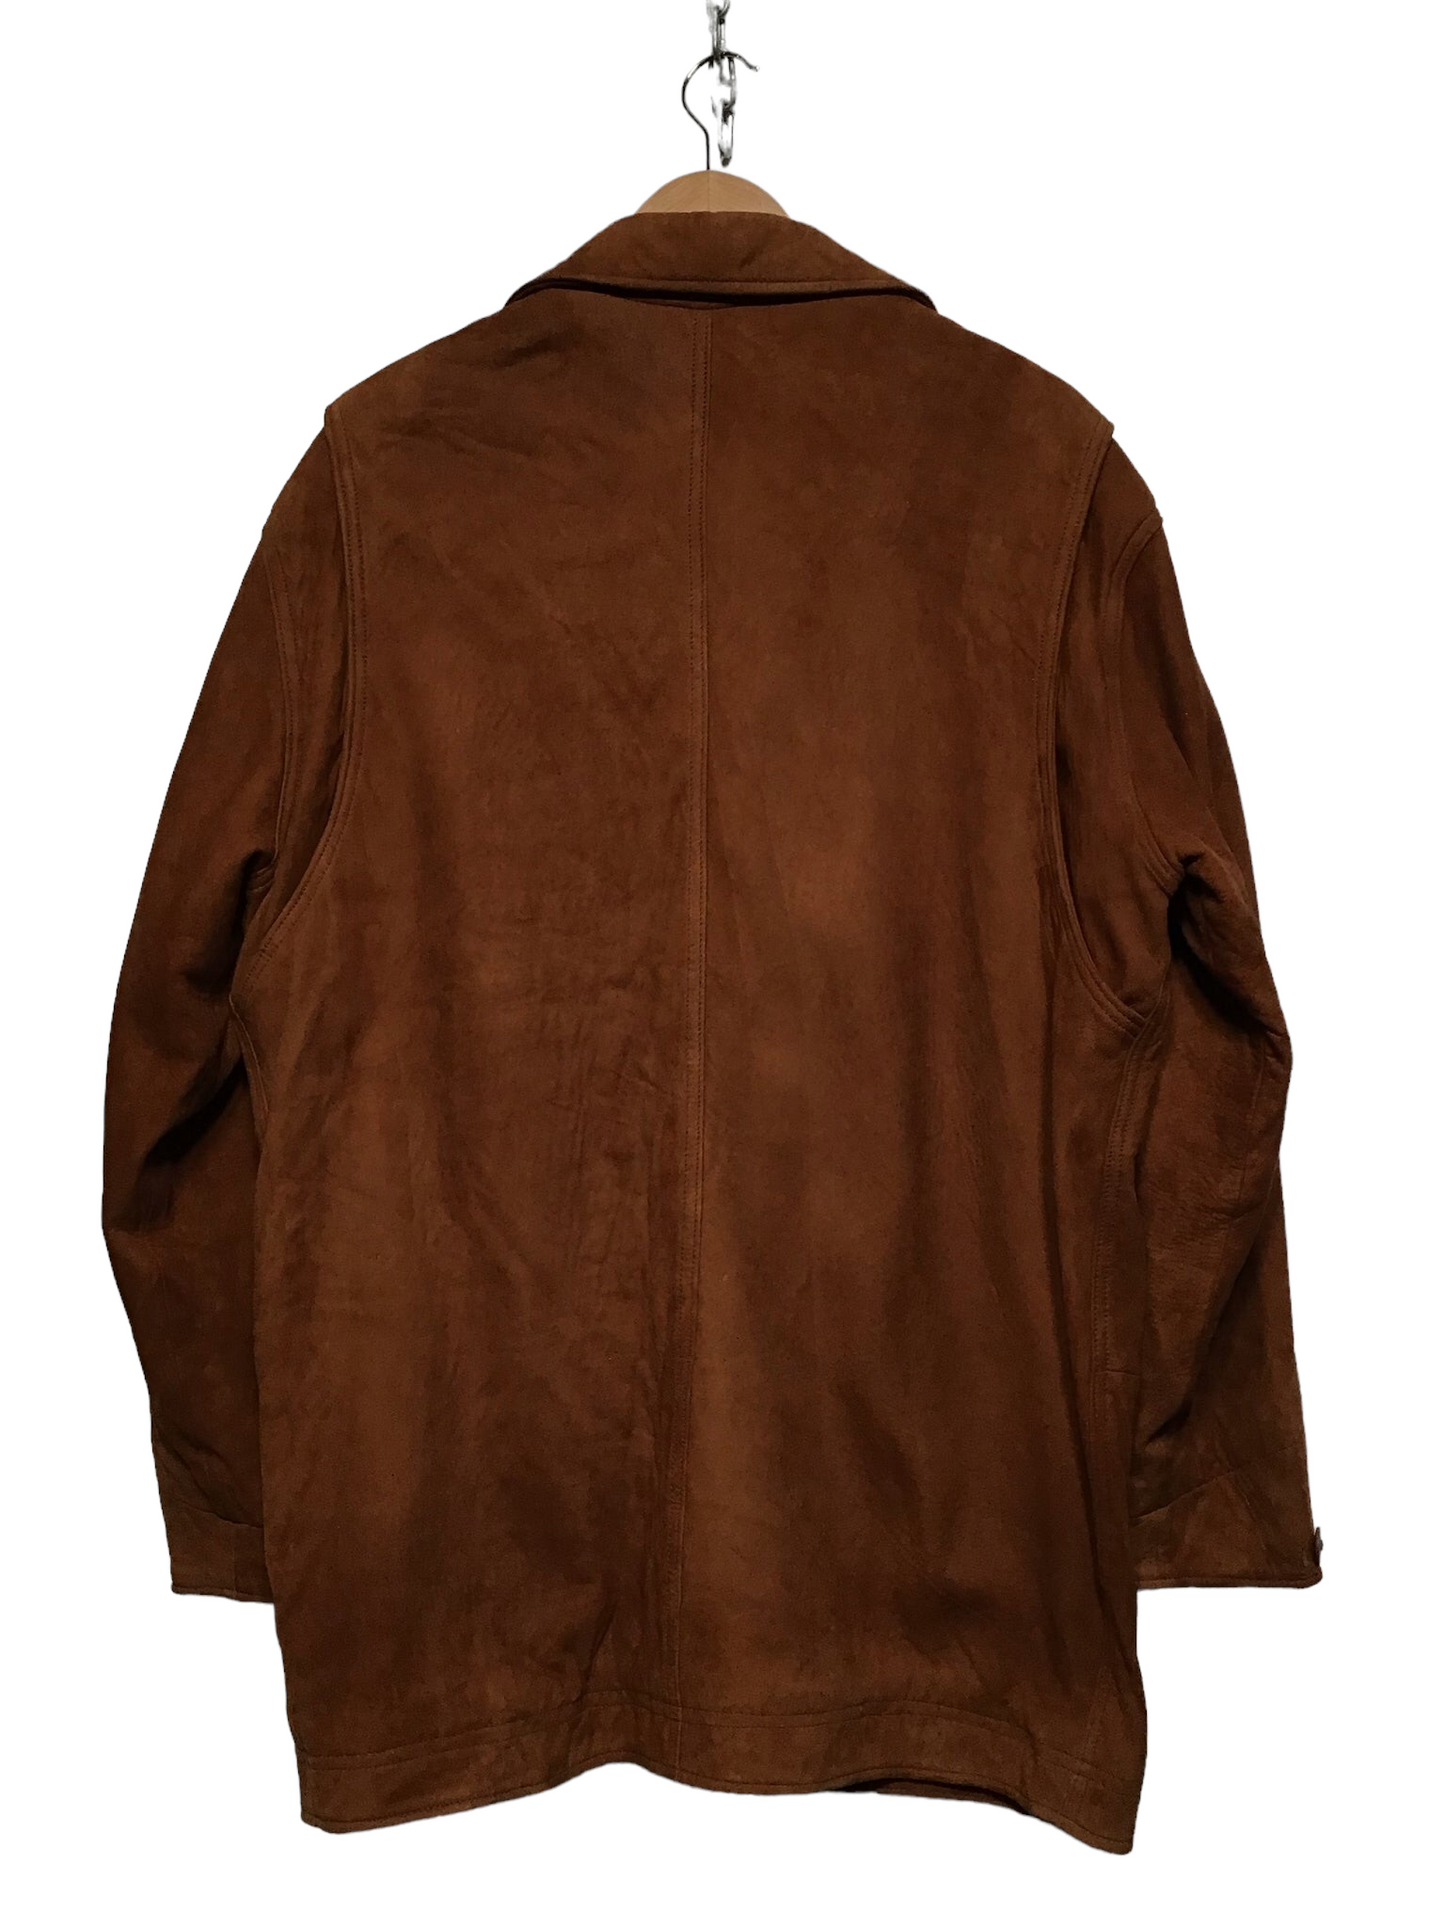 Brown Buttoned Suede Jacket (Size XXL)